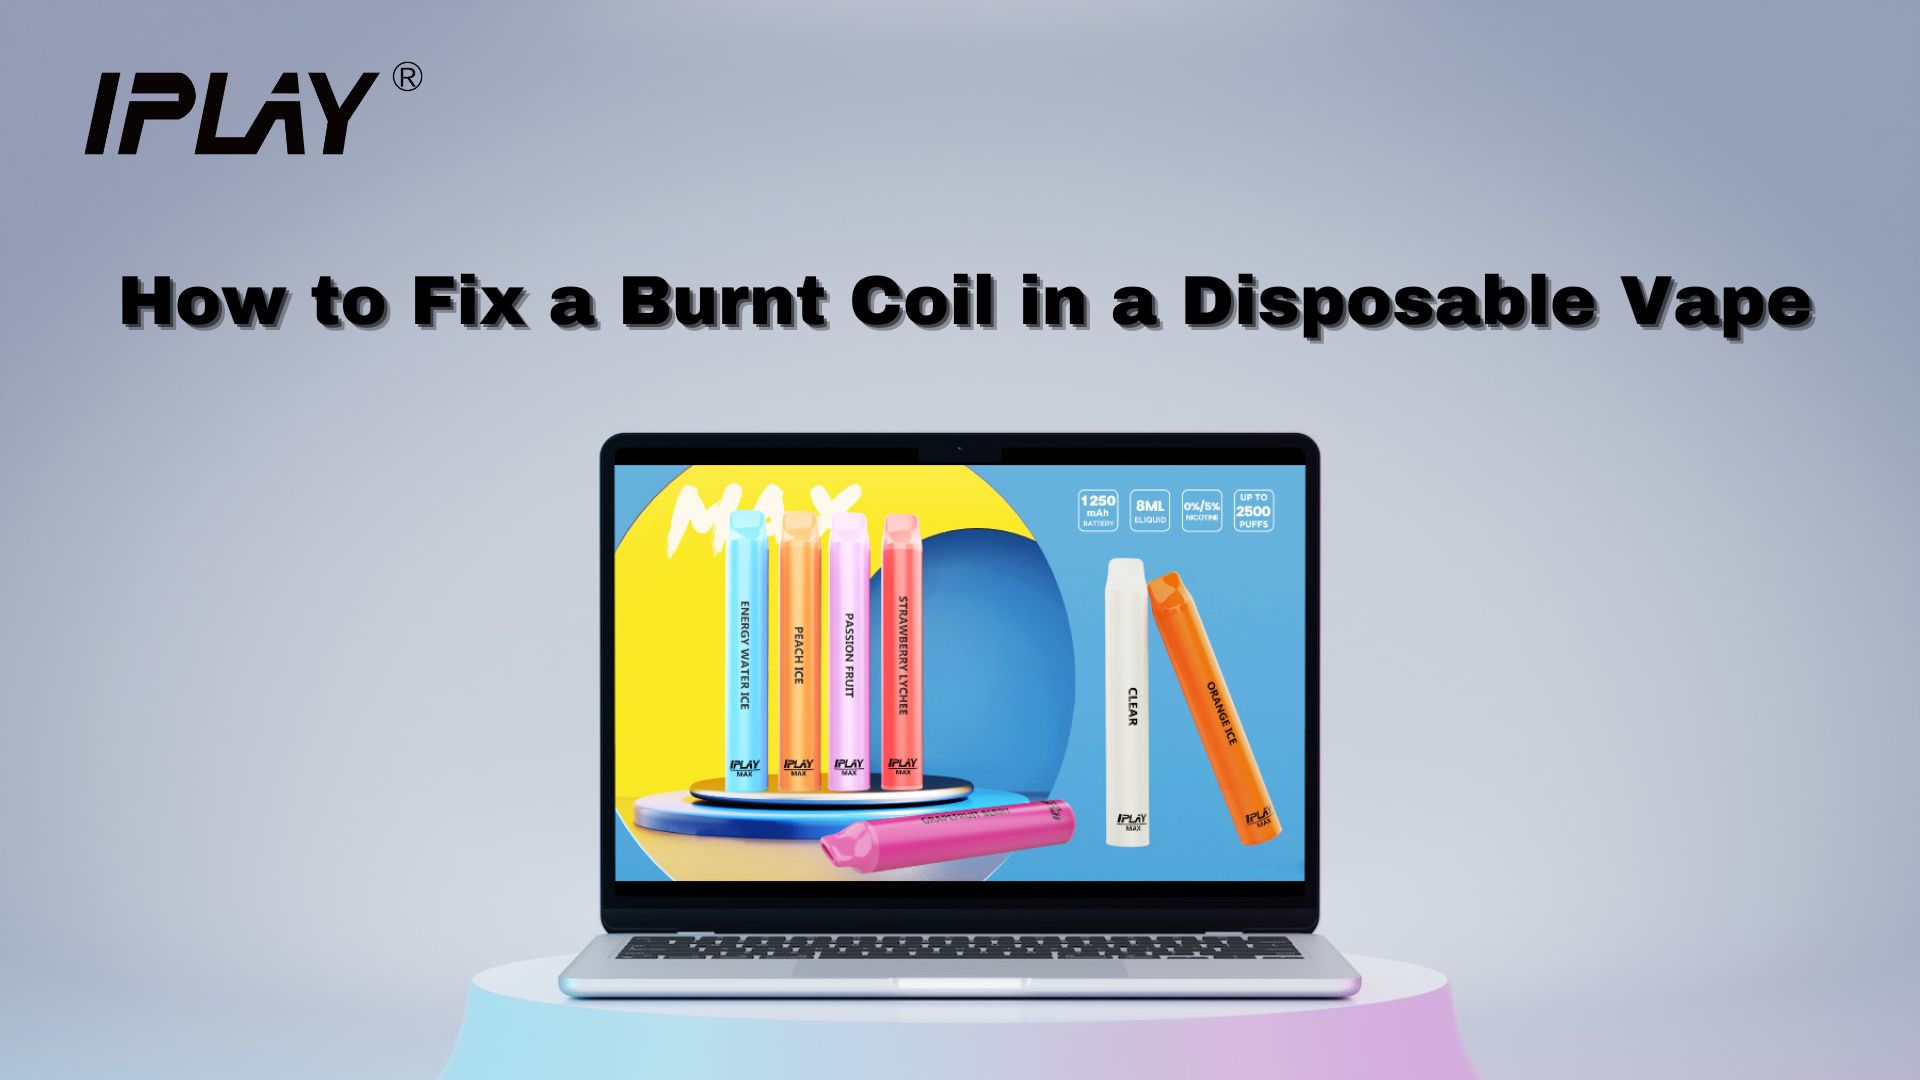 How to Fix a Burnt Coil in a Disposable Vape